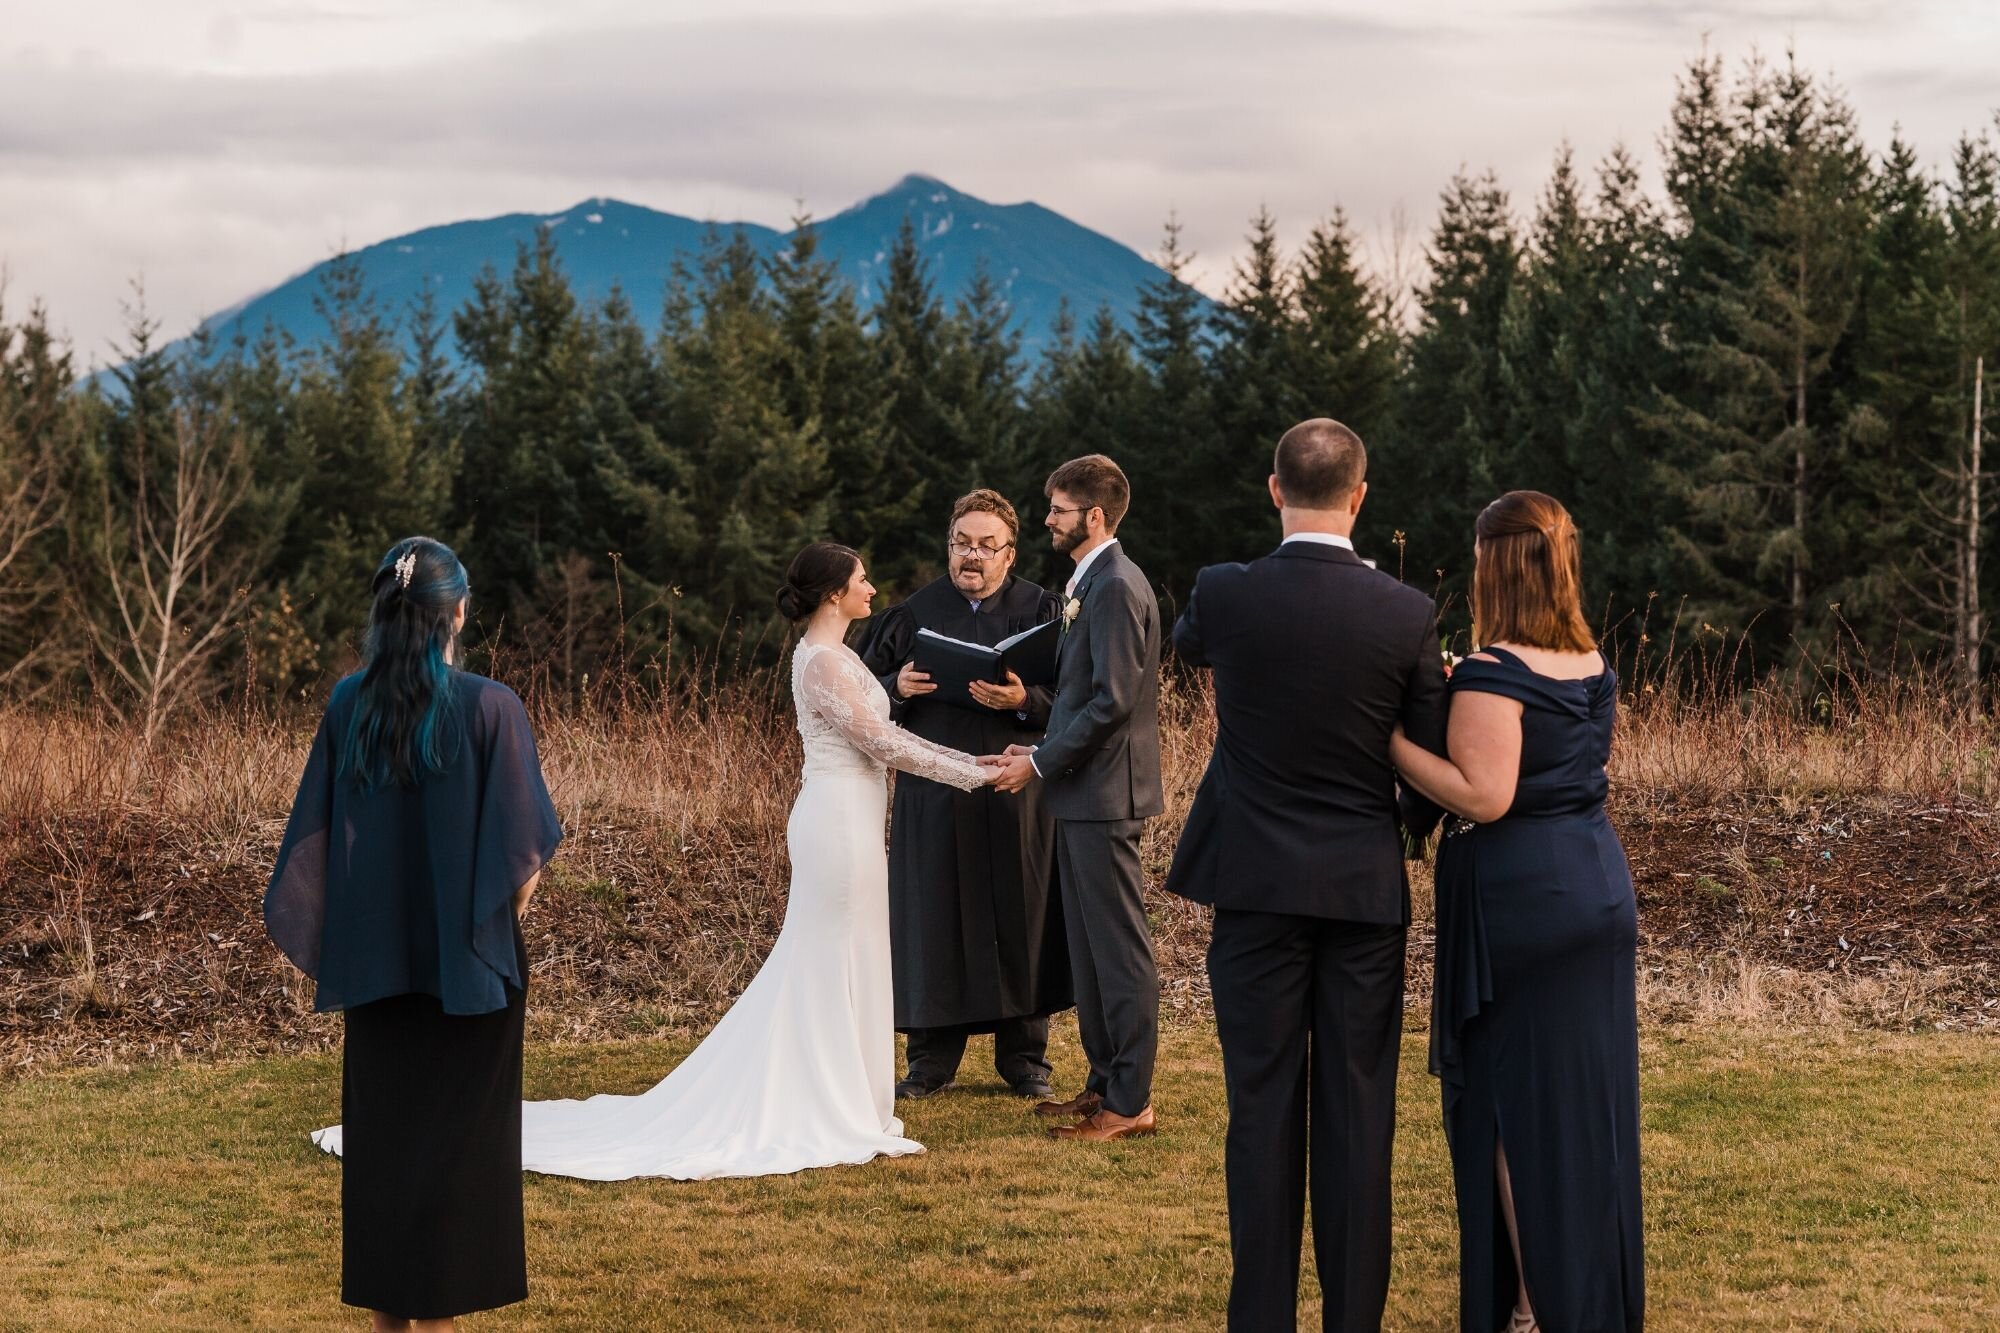 Creative ways to get married: how to still have your wedding during coronavirus quarantine | Between the Pine Adventure Wedding Photography